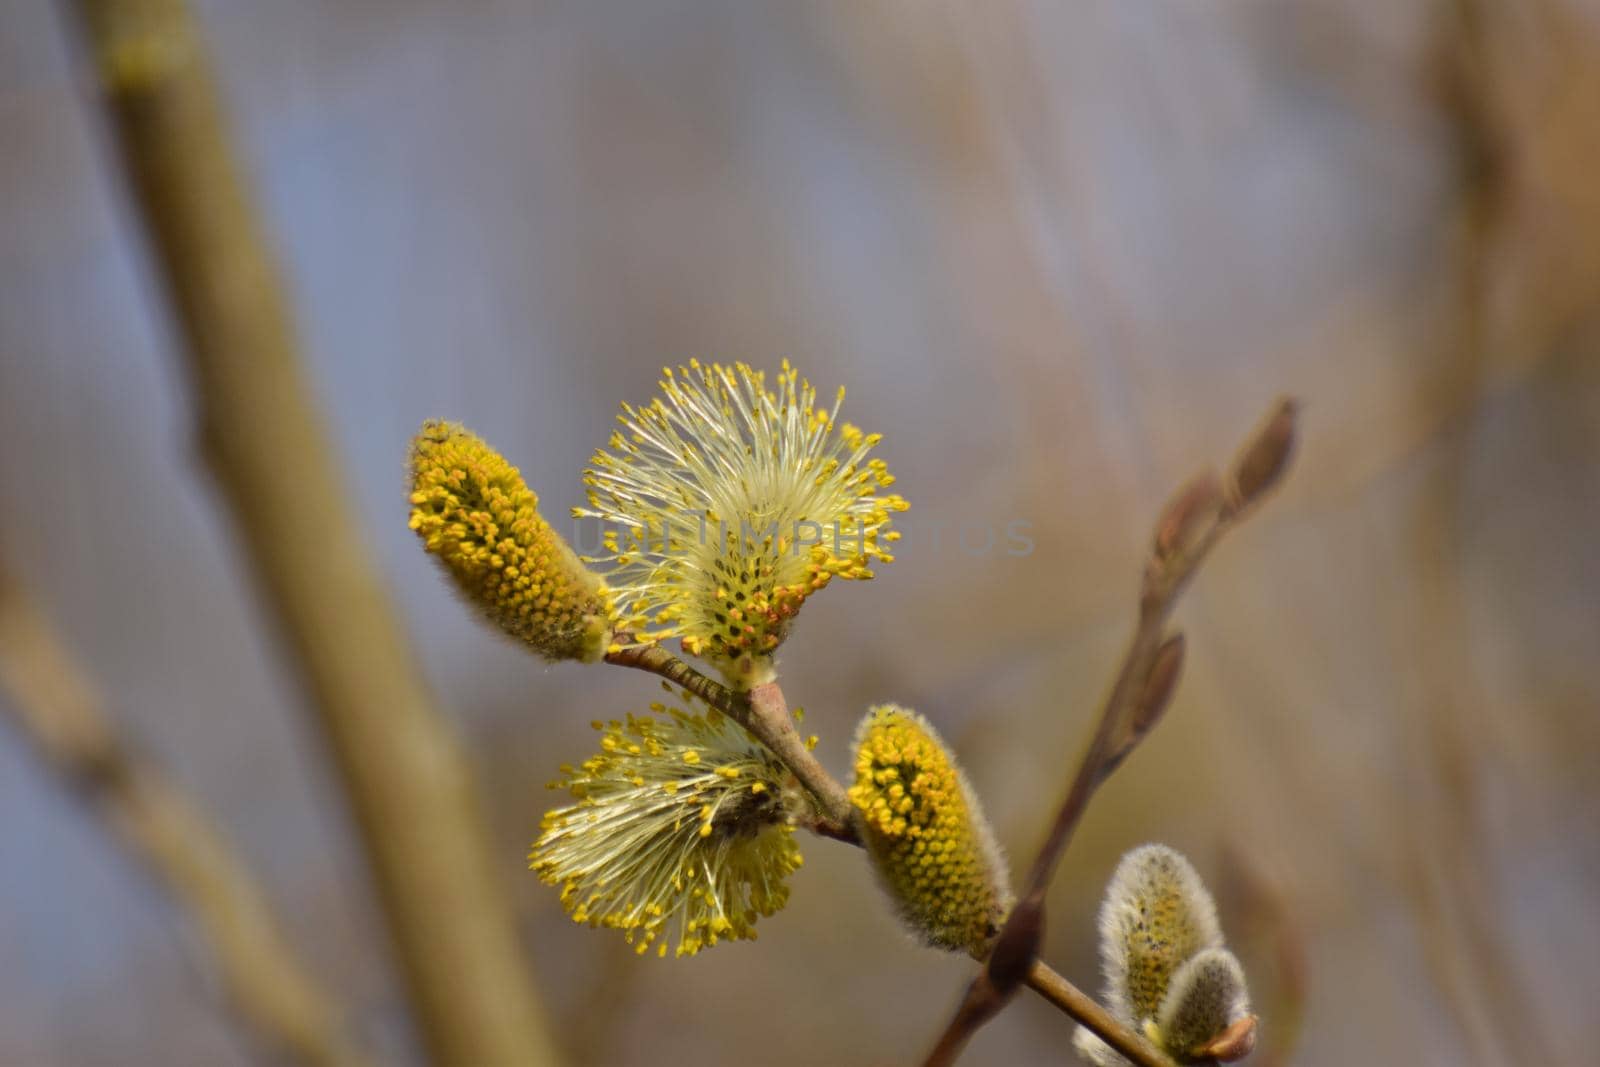 Flowering salix against a blurry background as a close up